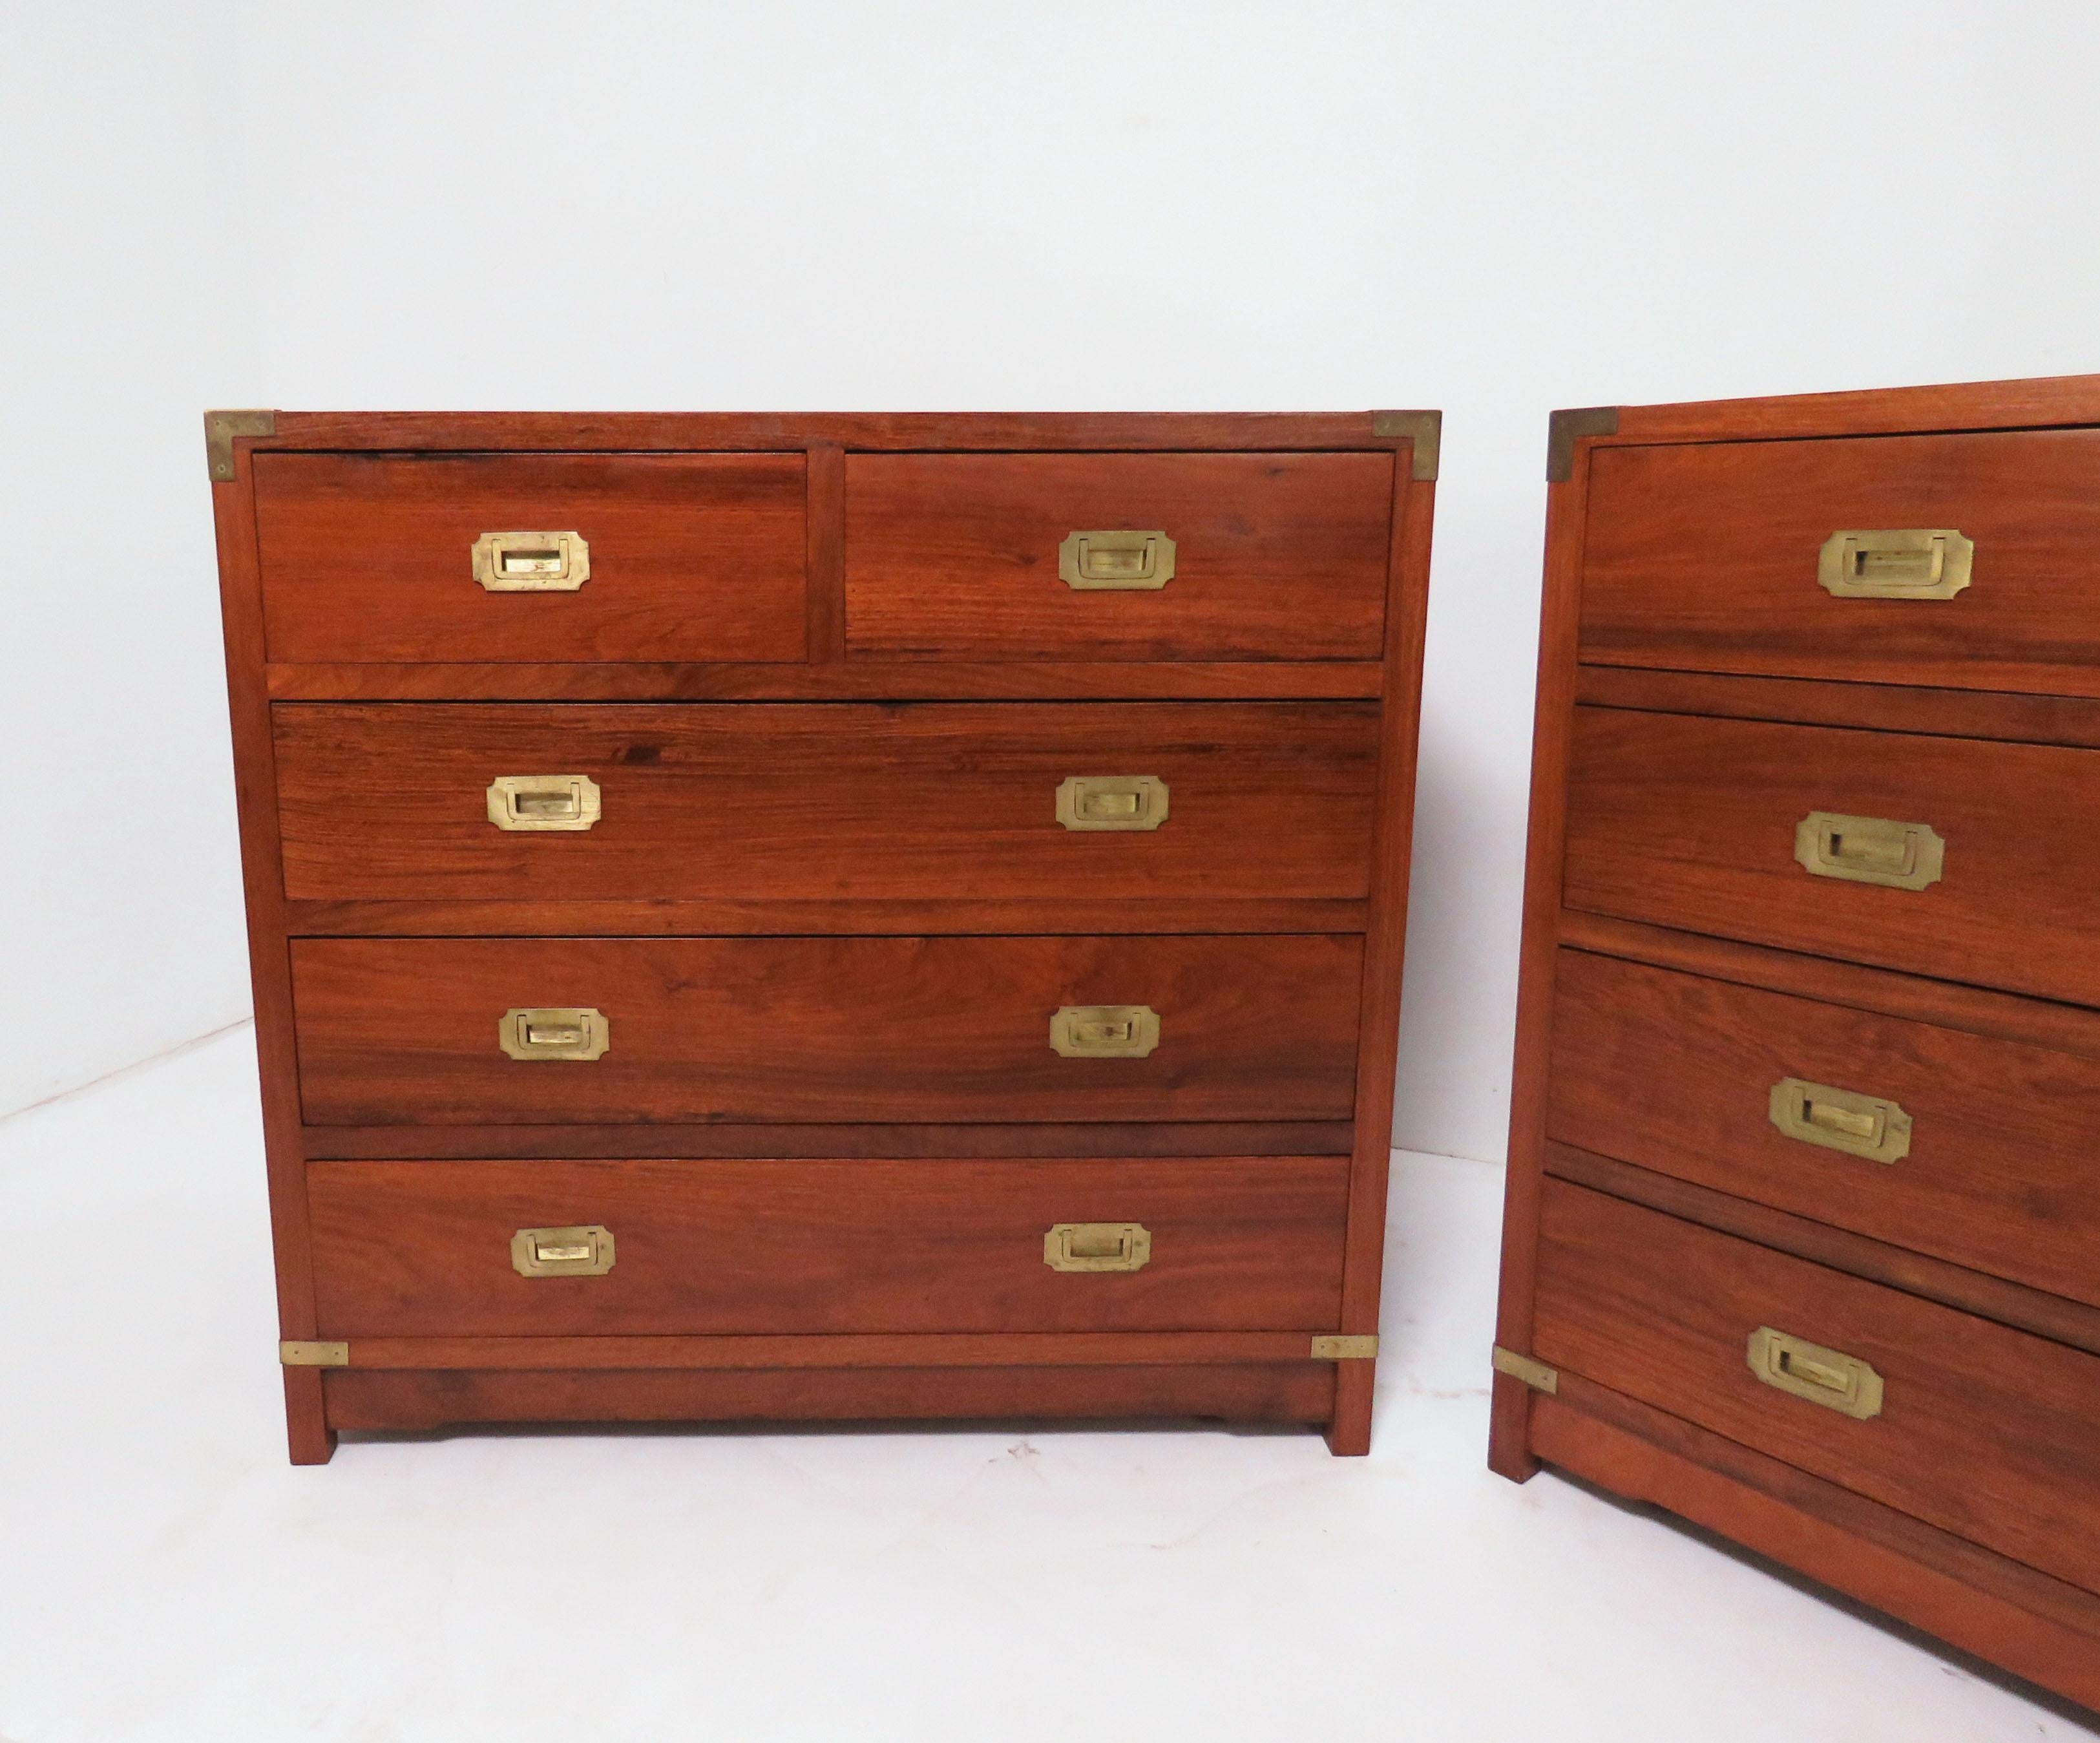 Pair of bespoke handcrafted Anglo-Indian Campaign dressers in solid mahogany with brass corner hardware and inset drawer handles, circa 1950s.